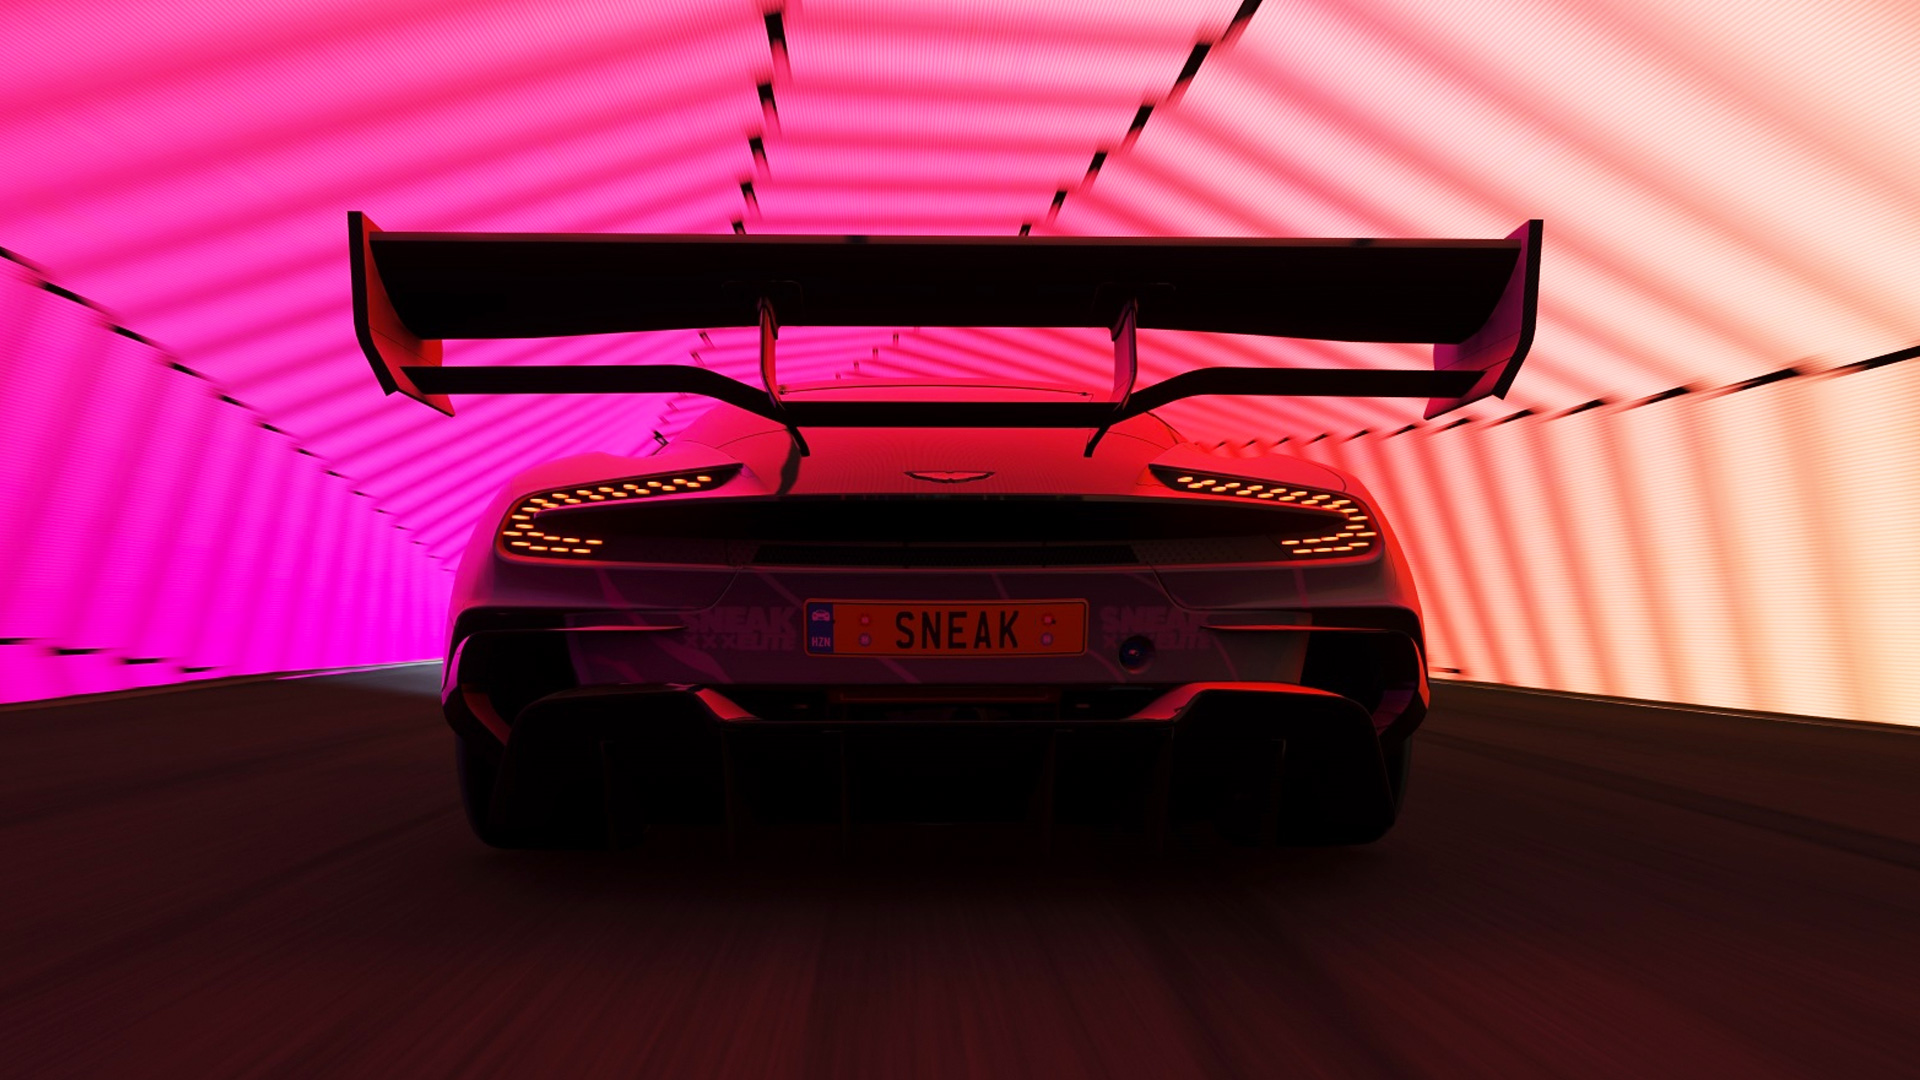 The back of an Aston Martin featuring a livery we created for Sneak energy. The license plate says SNEAK